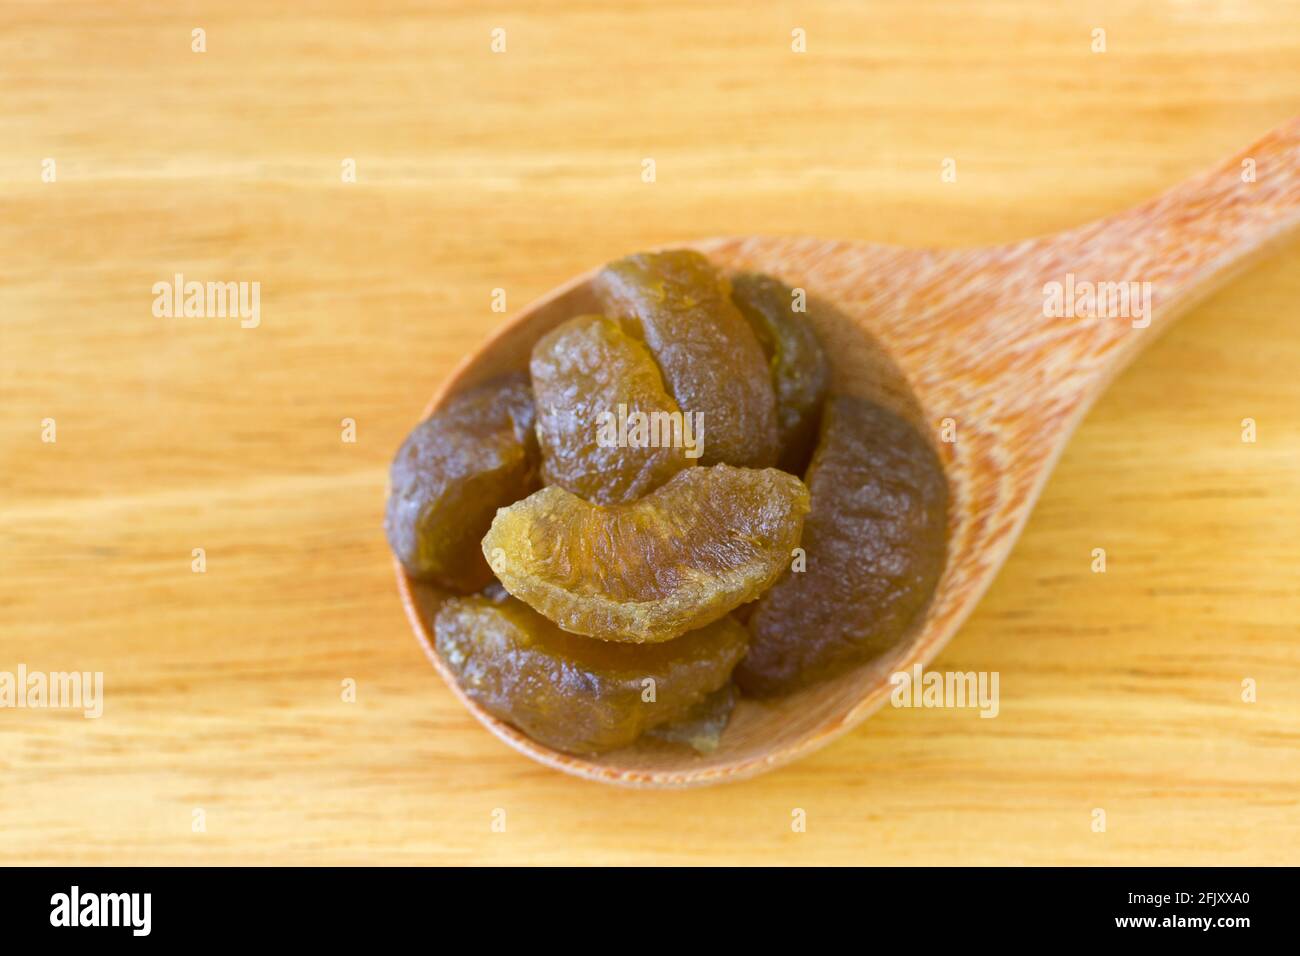 Dried Amla Indian gooseberry fruit in wood spoon on wooden background (Phyllanthus emblica) Stock Photo